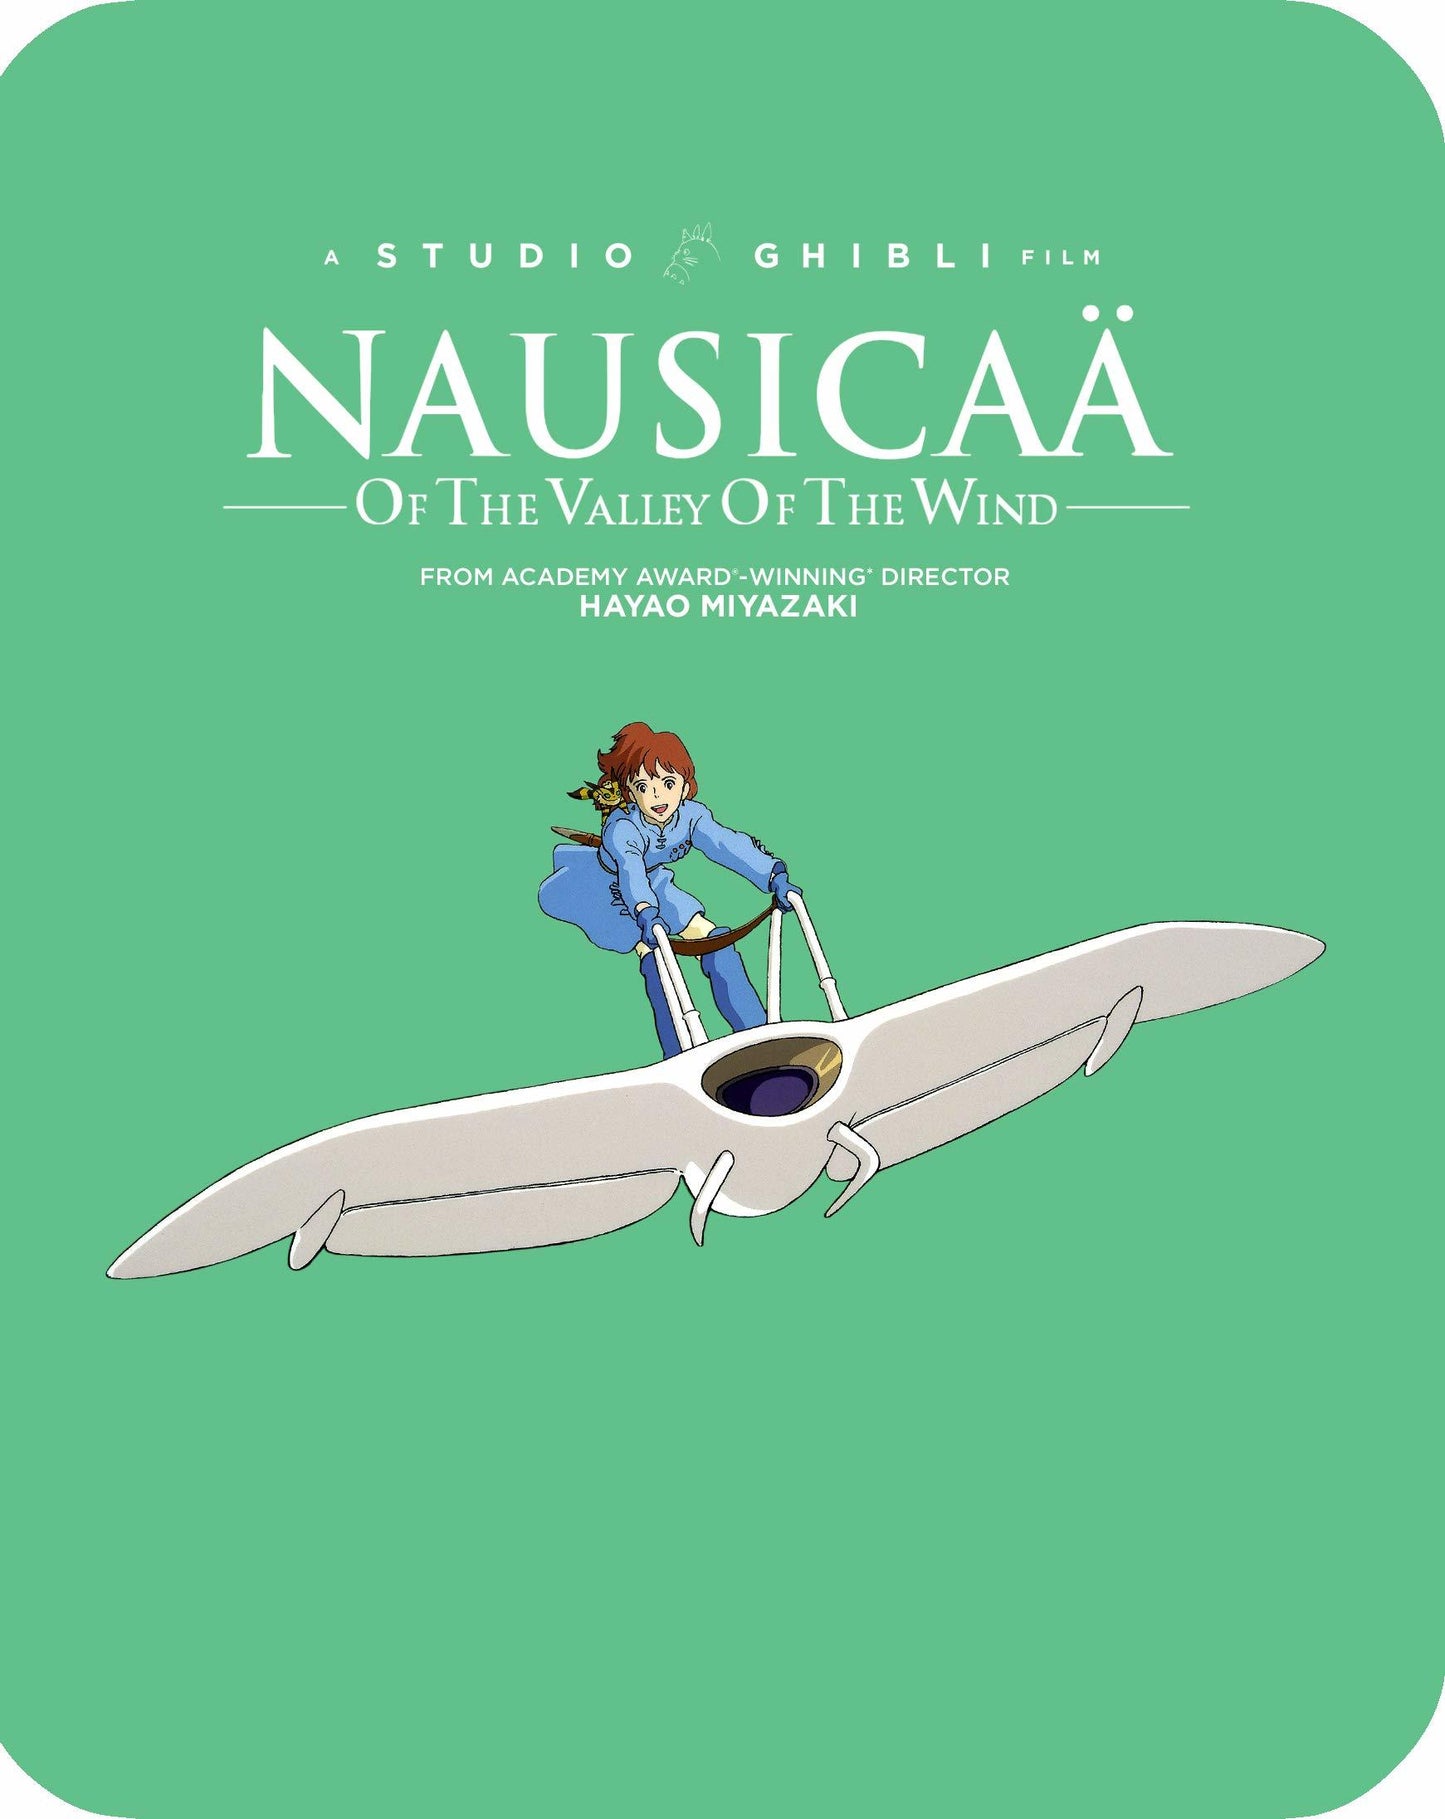 NAUSICAA OF THE VALLEY OF THE WIND (1984)